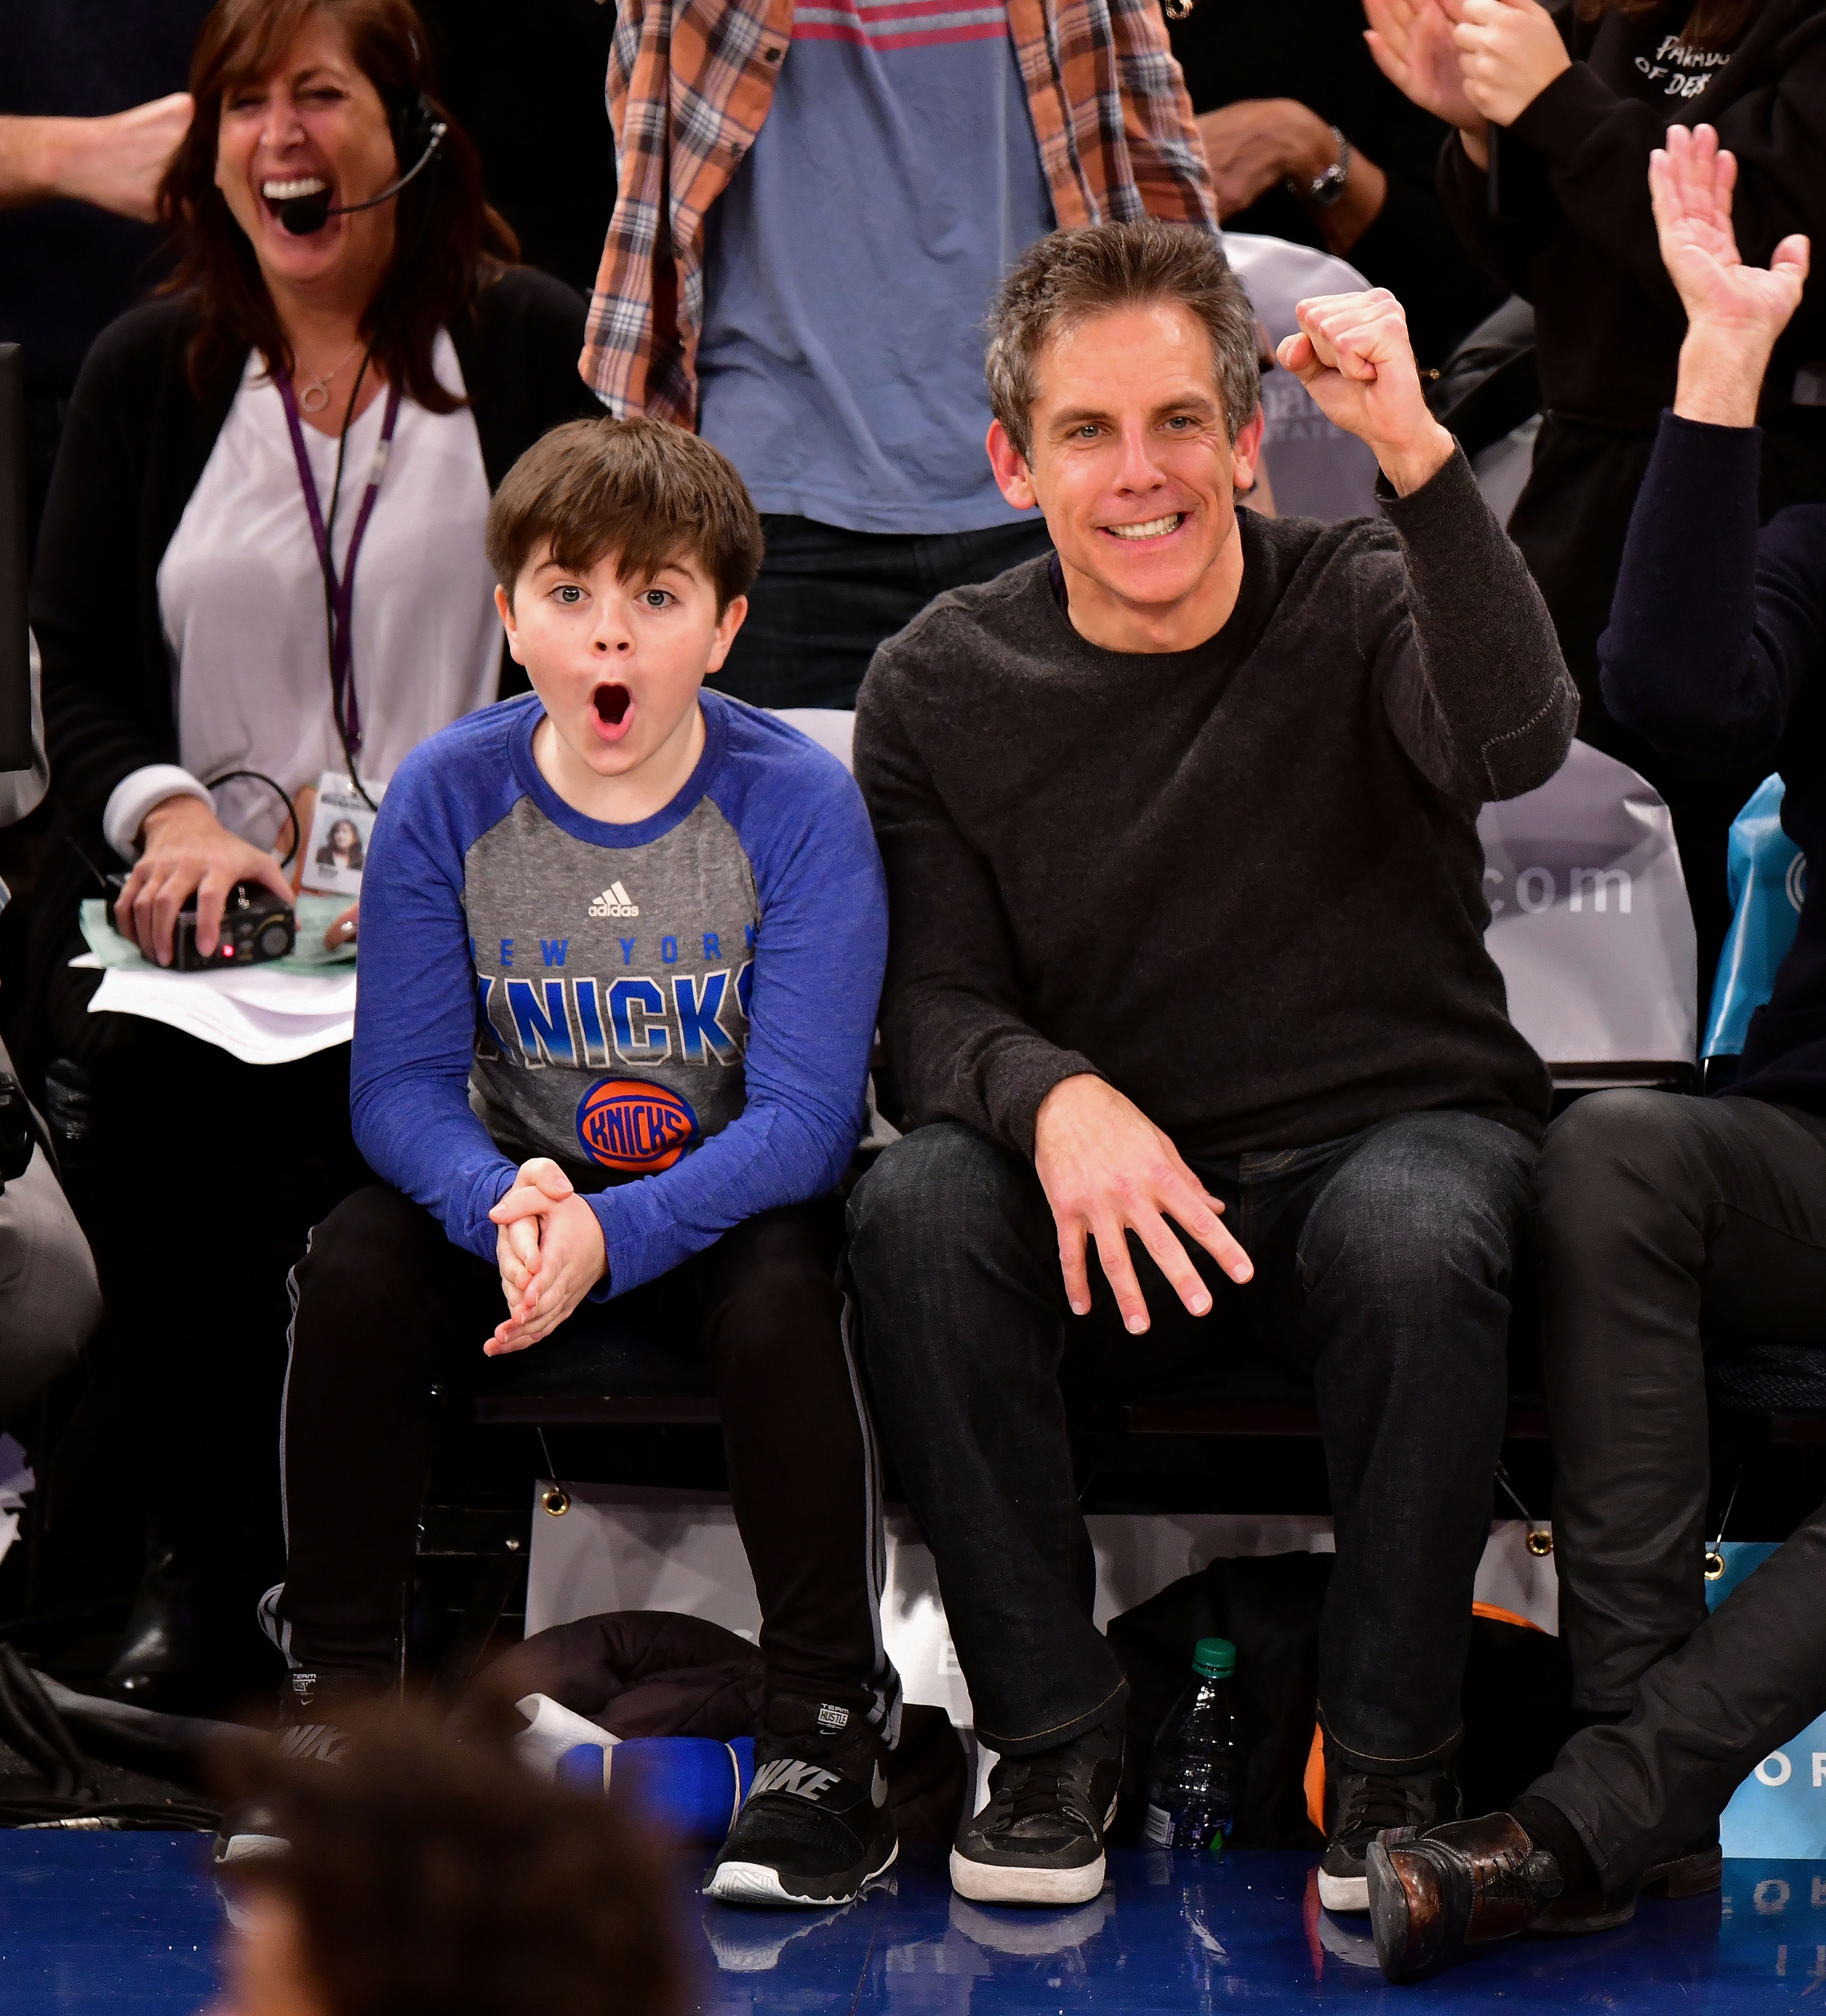 Quinlin and Ben Stiller at a Toronto Raptors Vs New York Knicks game in New York City on November 22, 2017 | Source: Getty Images